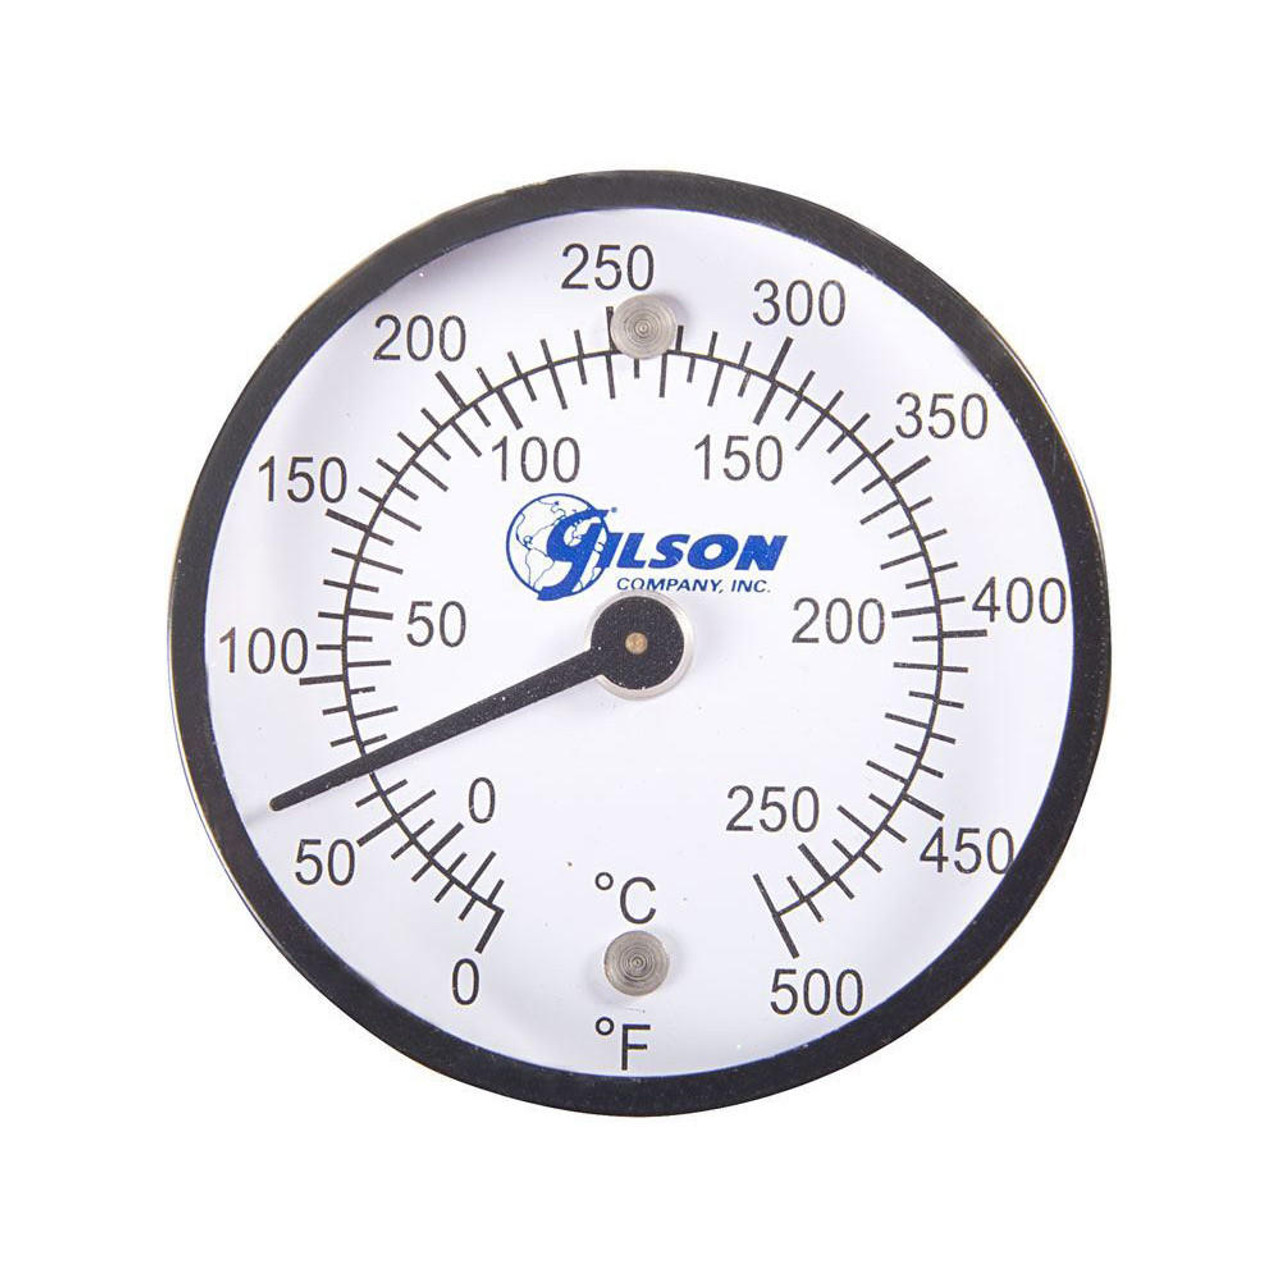 https://cdn11.bigcommerce.com/s-zgzol/images/stencil/1280x1280/products/8817/237397/gilson-company-surface-dial-lab-thermometer-0-to-500f-15-to-250c__78161.1698295584.jpg?c=2